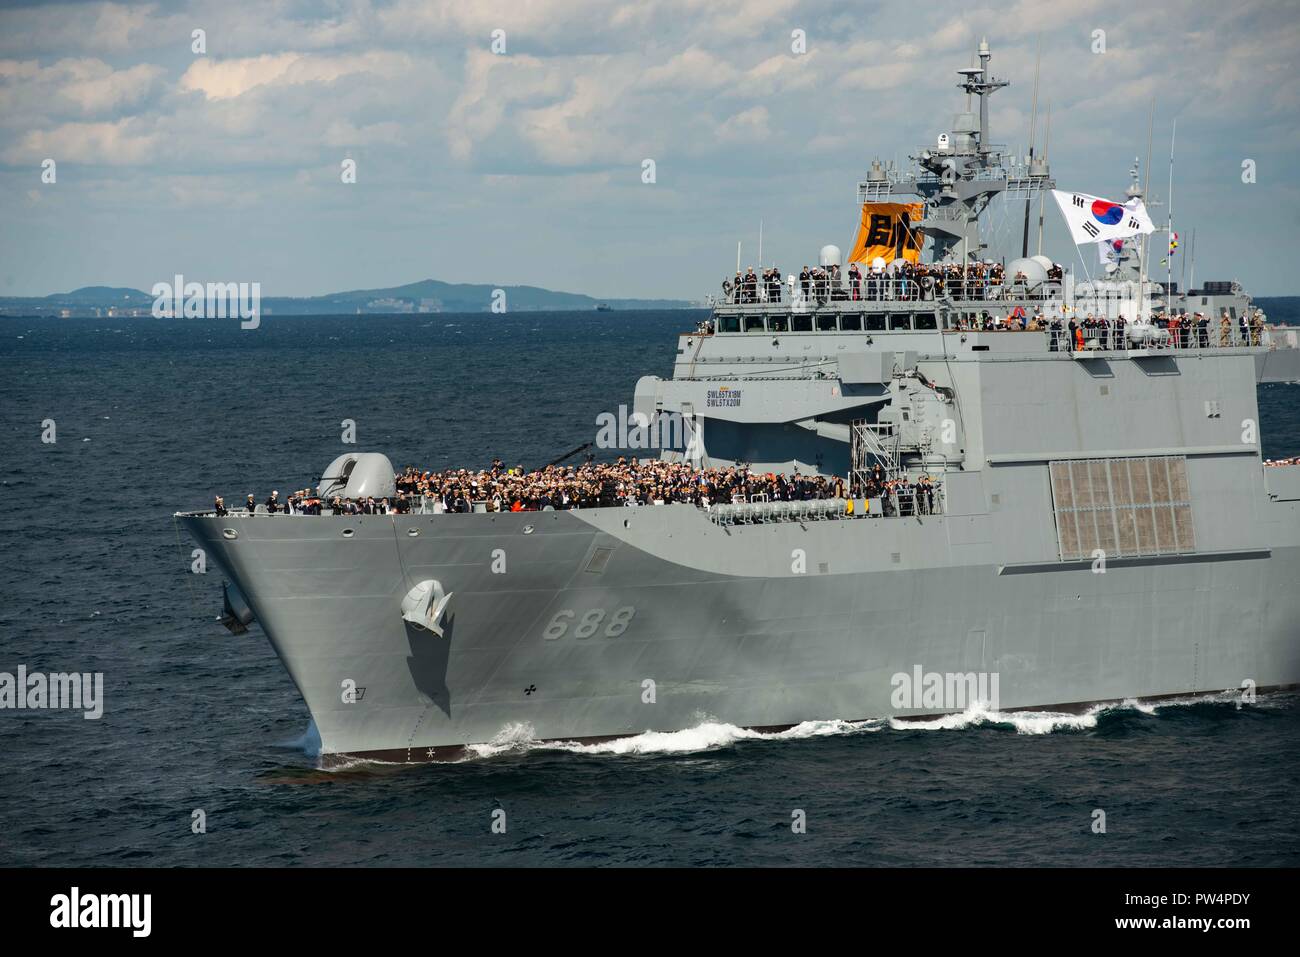 181011-N-DK042-0195  WATERS OFF THE KOREAN PENINSULA (Oct. 11, 2018) A crowd on the Republic of Korea (ROK) navy landing ship tank Ilchulbong (LST 688) observes multinational ships during a pass in review as part of the Republic of Korea International Fleet Review (IFR) 2018. IFR 2018 is hosted by the Republic of Korea Navy to help enhance mutual trust and confidence with navies from around the world. The forward-deployed aircraft carrier USS Ronald Reagan (CVN 76) is forward-deployed to the U.S. 7th Fleet area of operations in support of security and stability in the Indo-Pacific region. (U.S Stock Photo